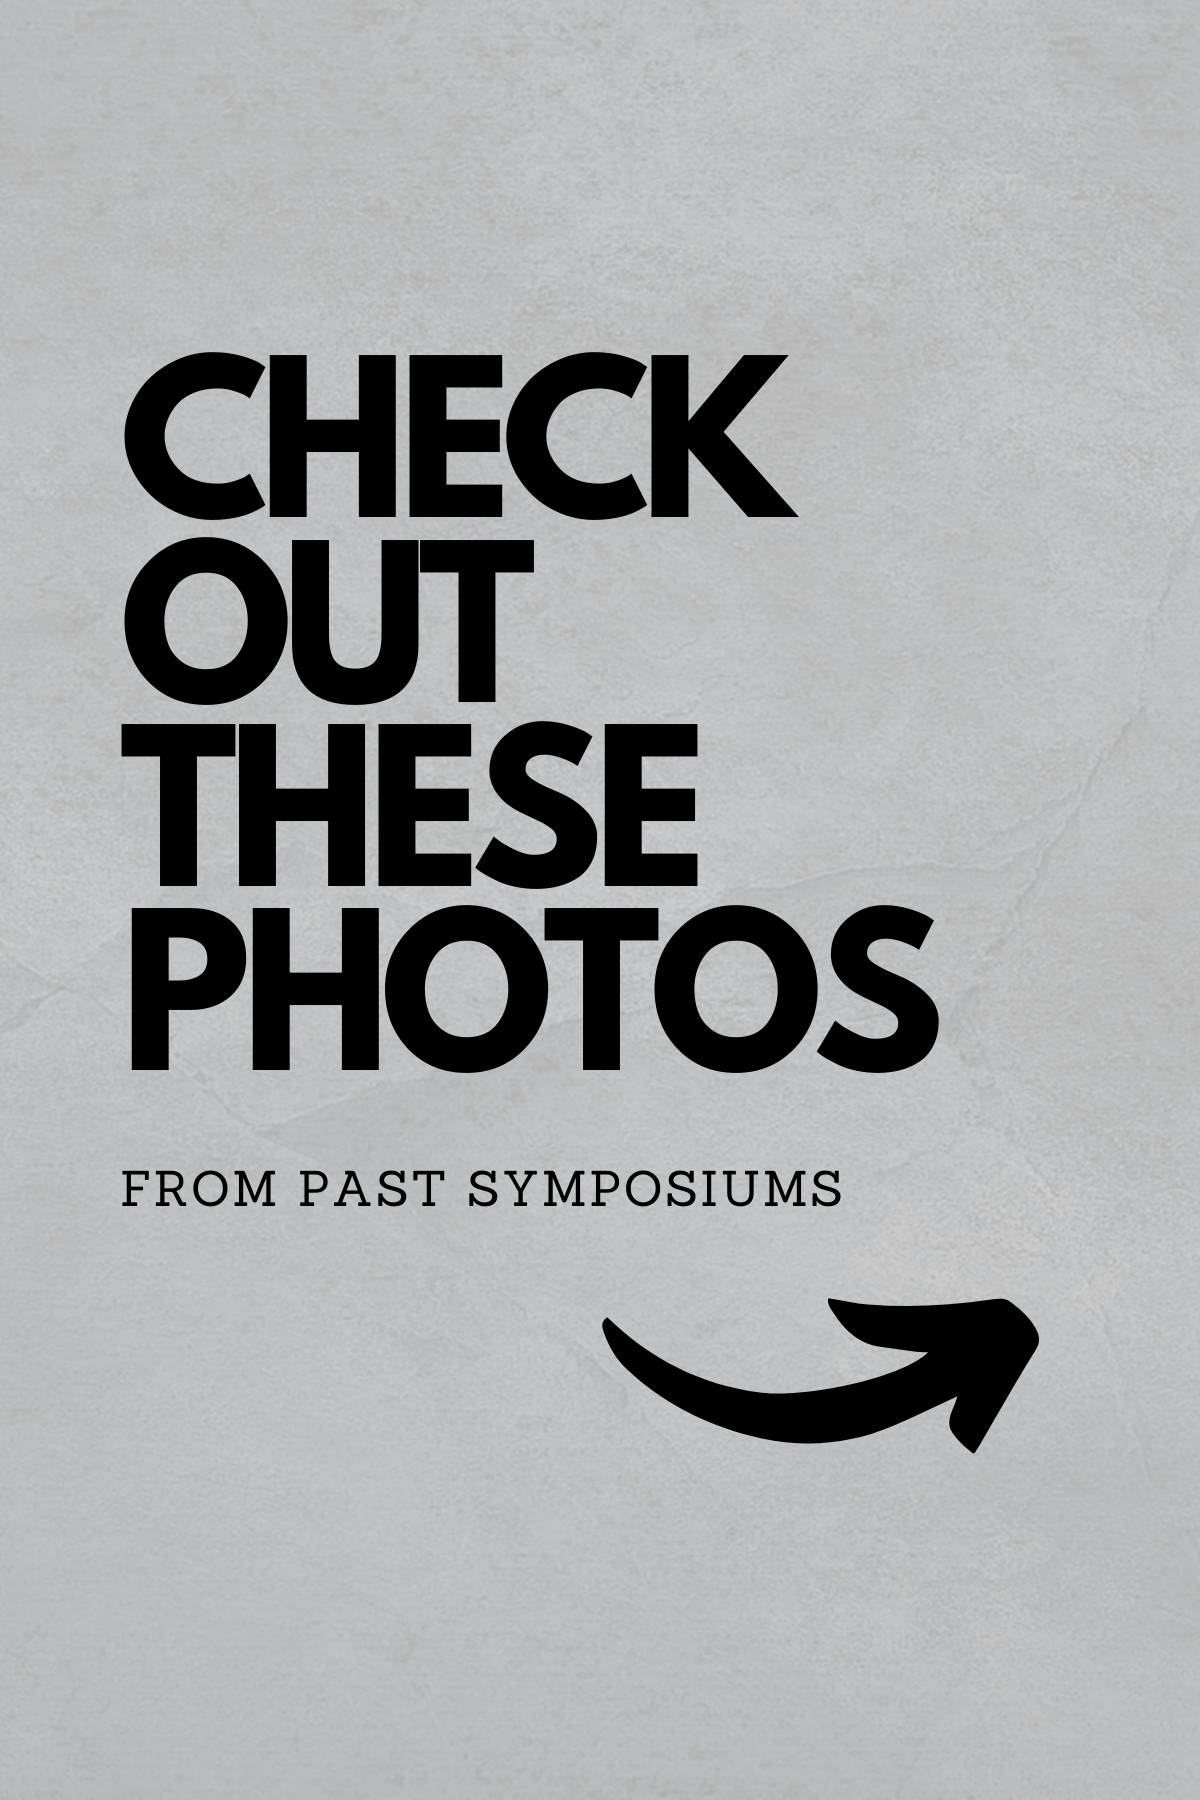 Check out these photos from past symposia!